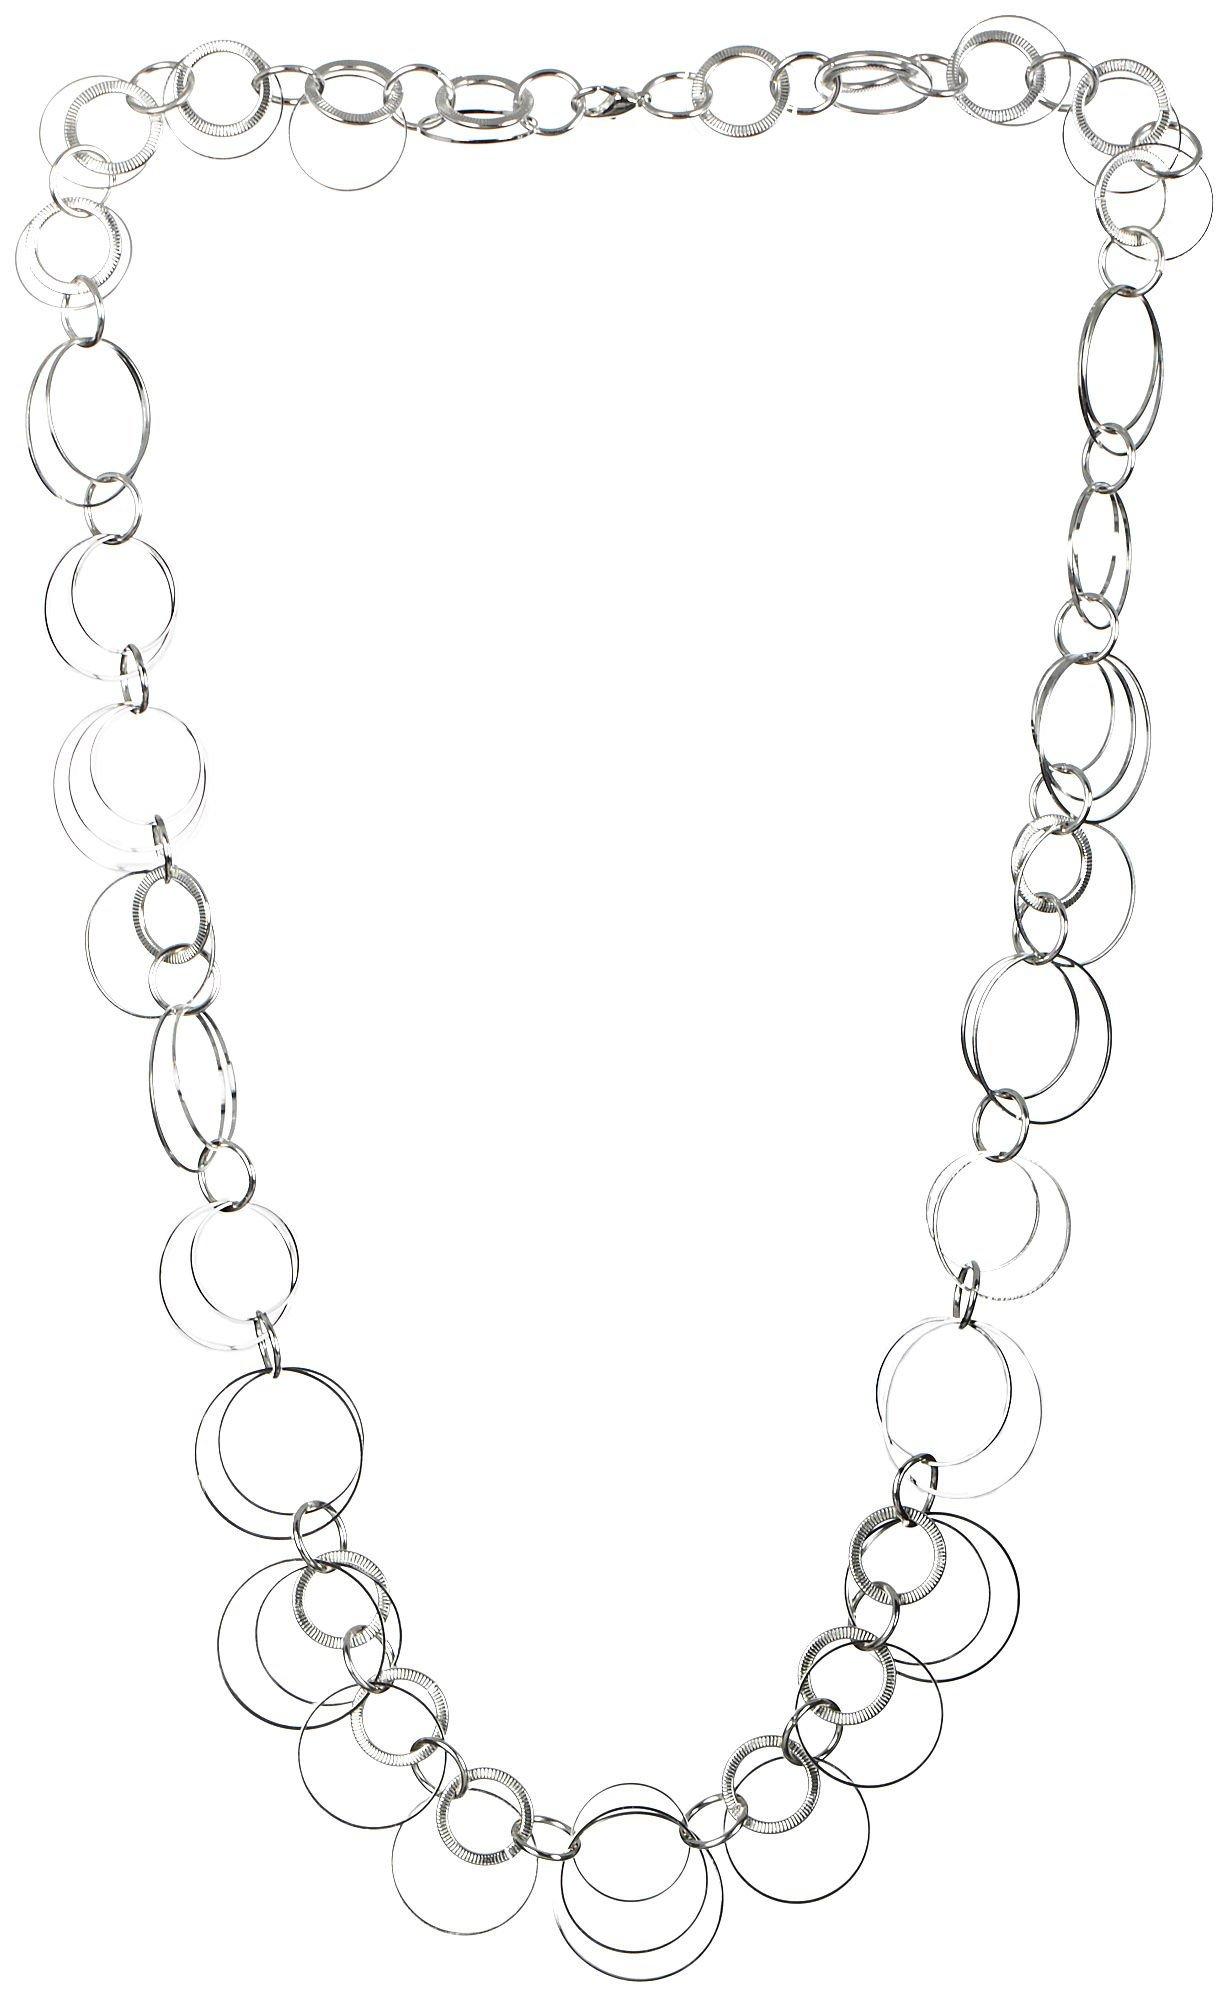 Multi-Ring Open Link Chain Necklace